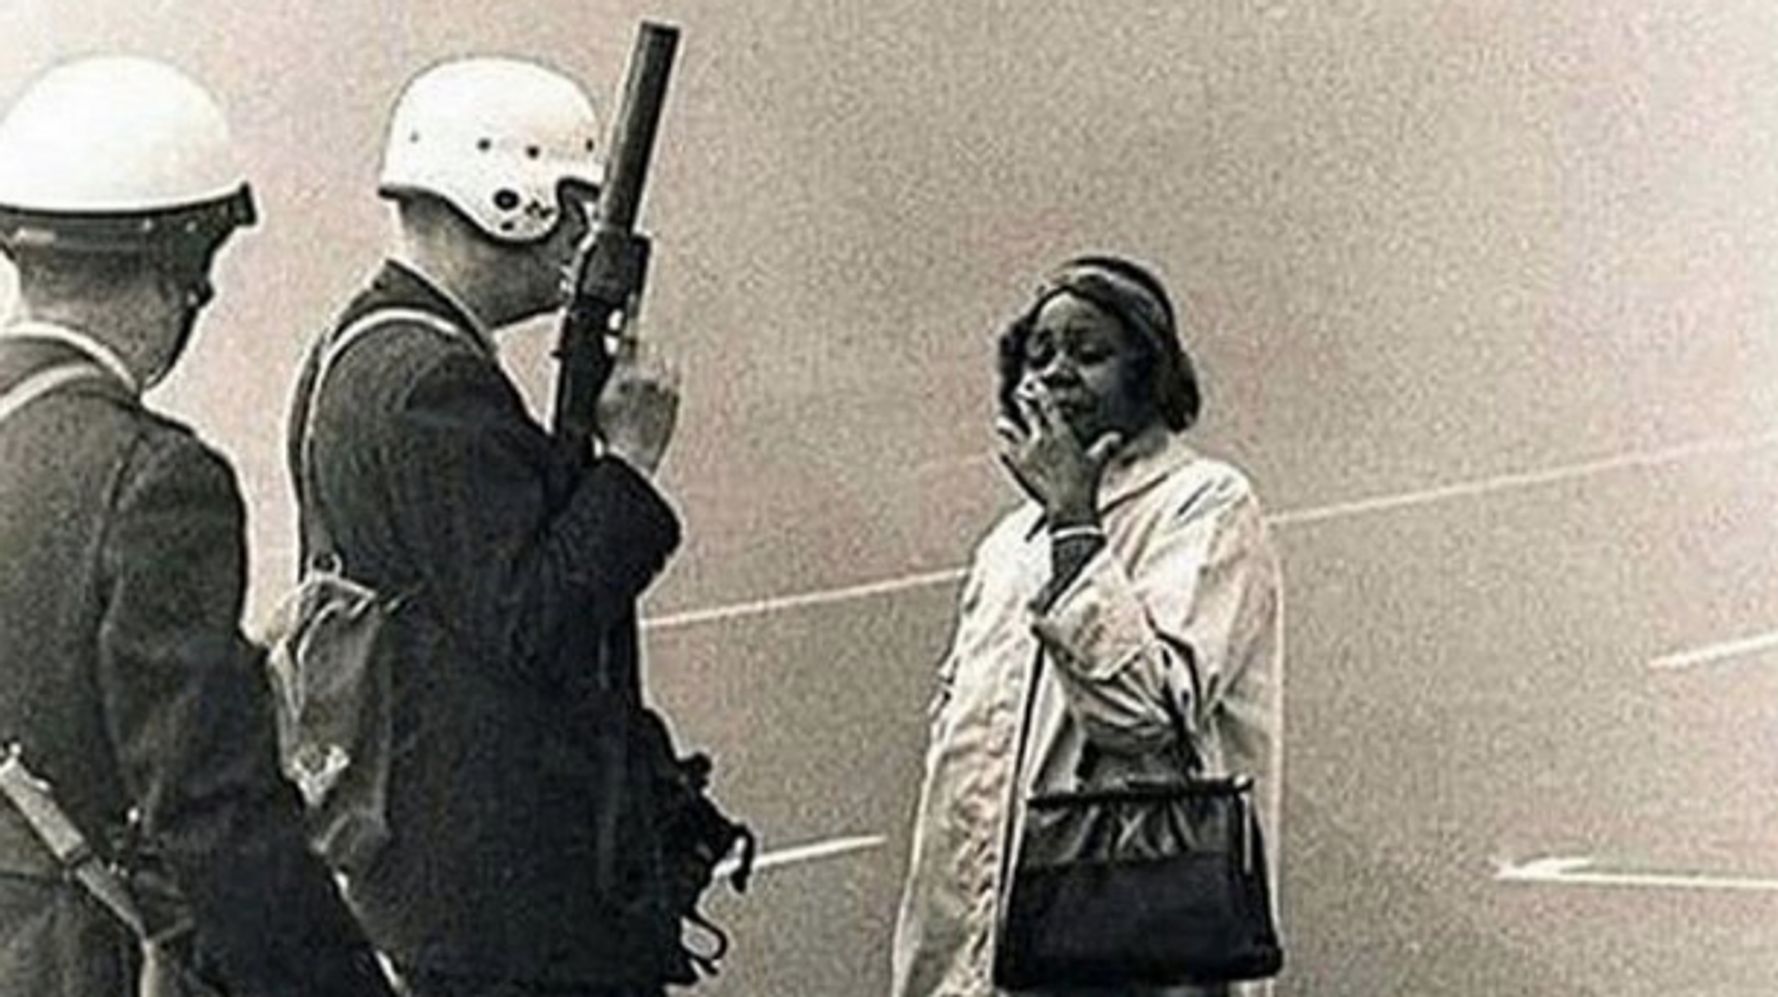 Old Black woman smoking cigarette in front of white racist police